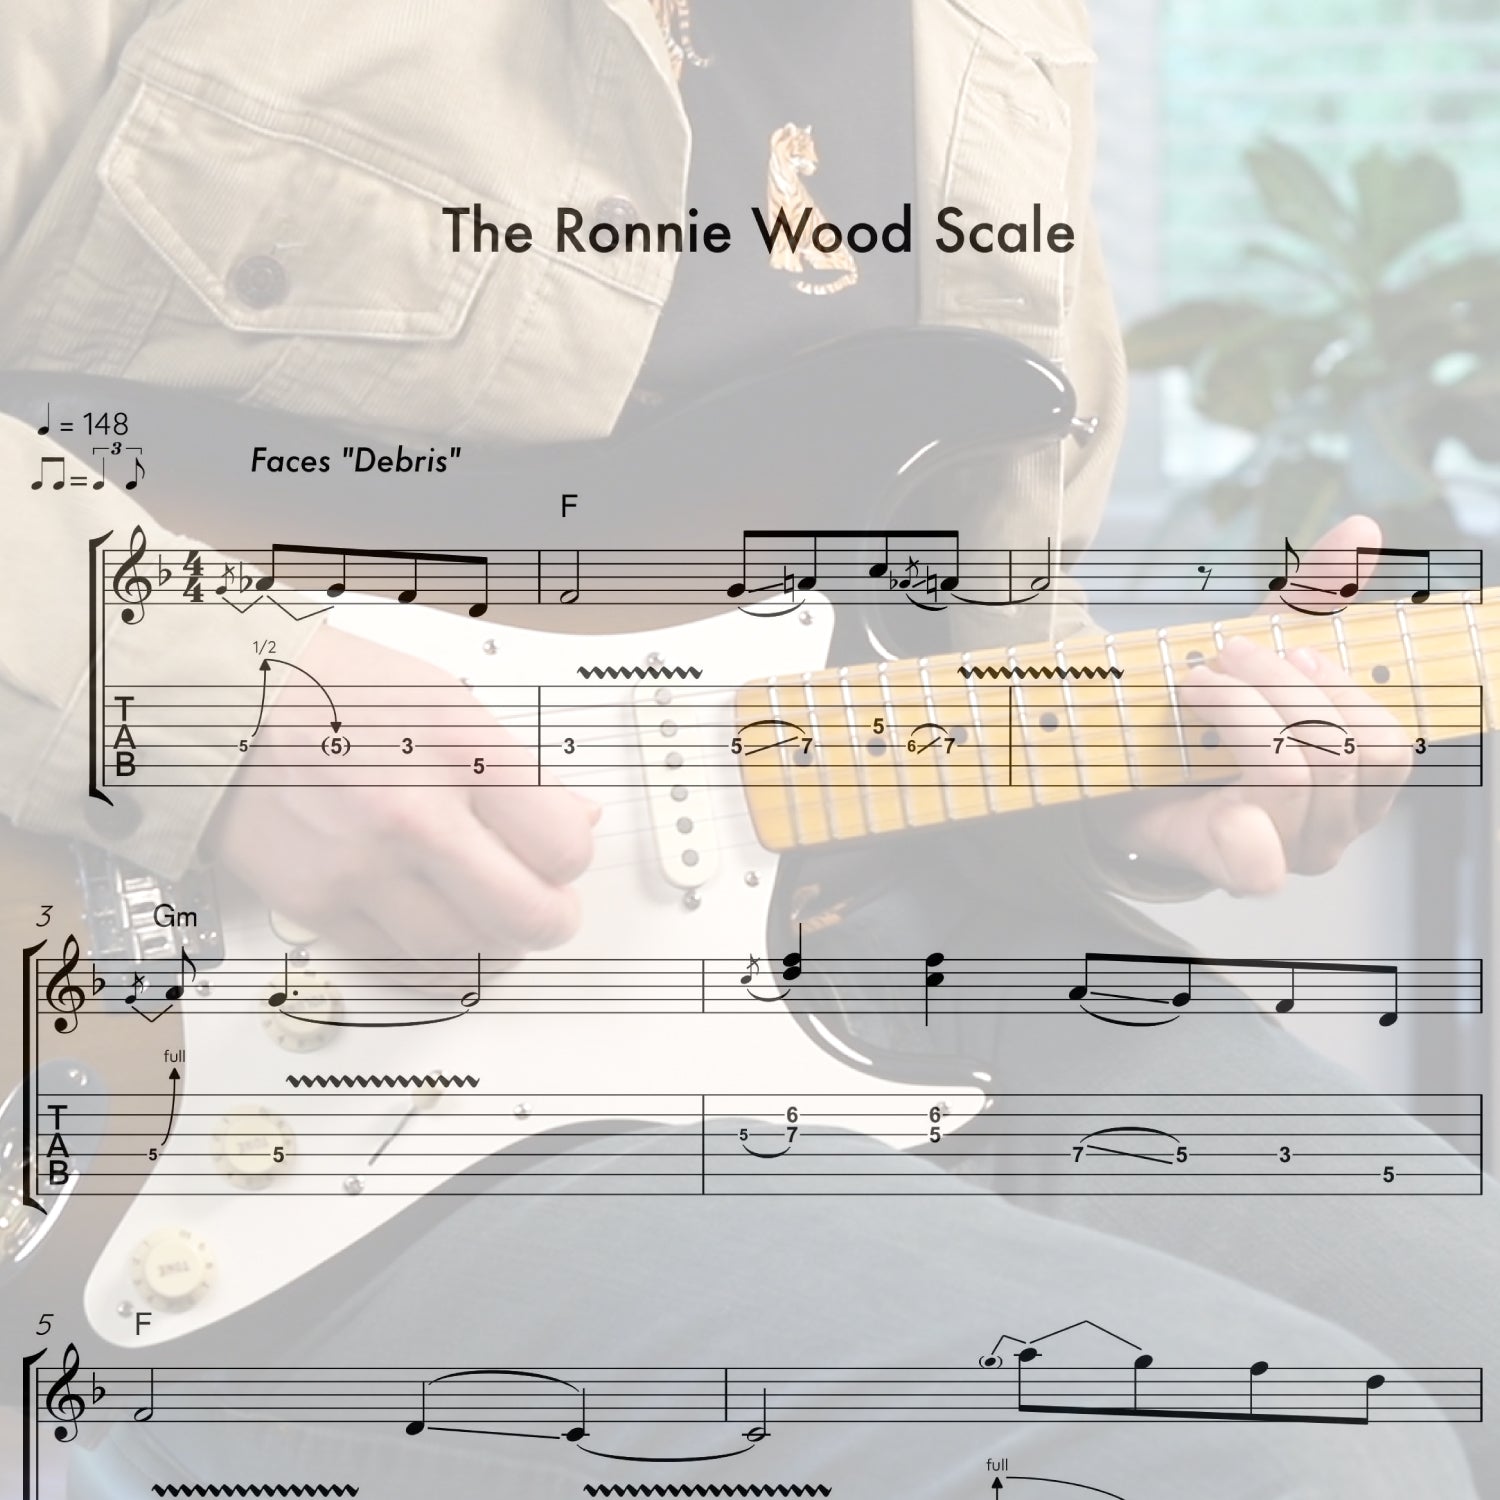 The Ronnie Wood Scale